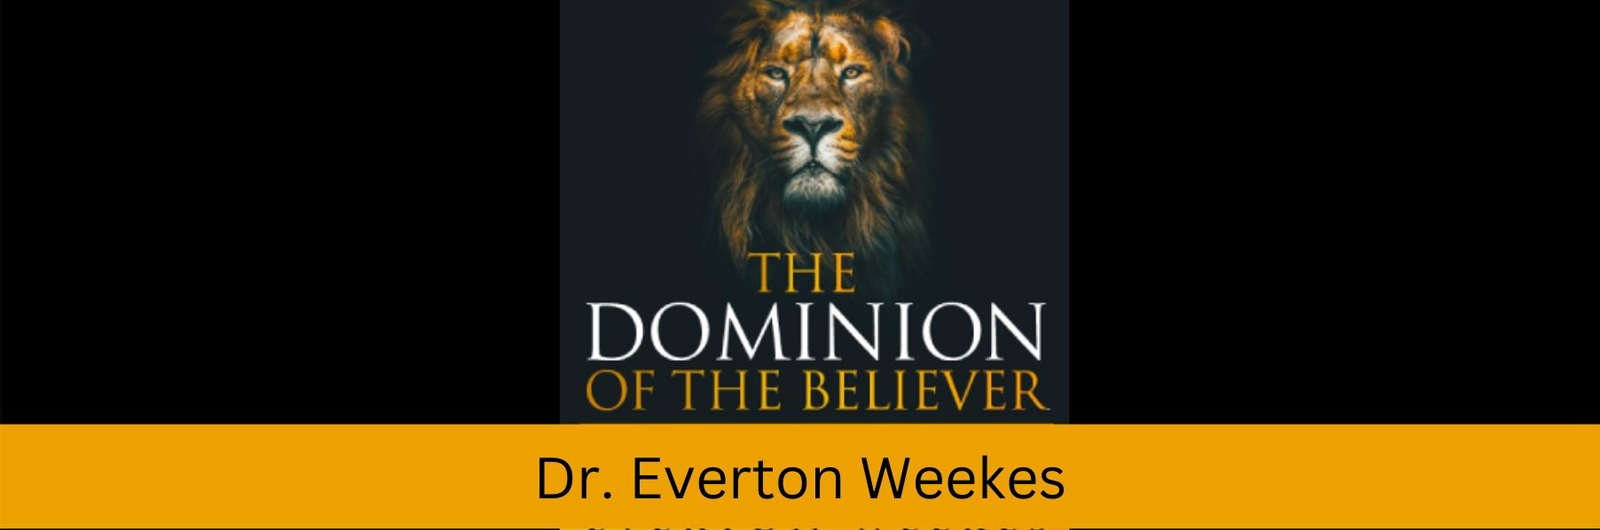 Dominion of a Believer